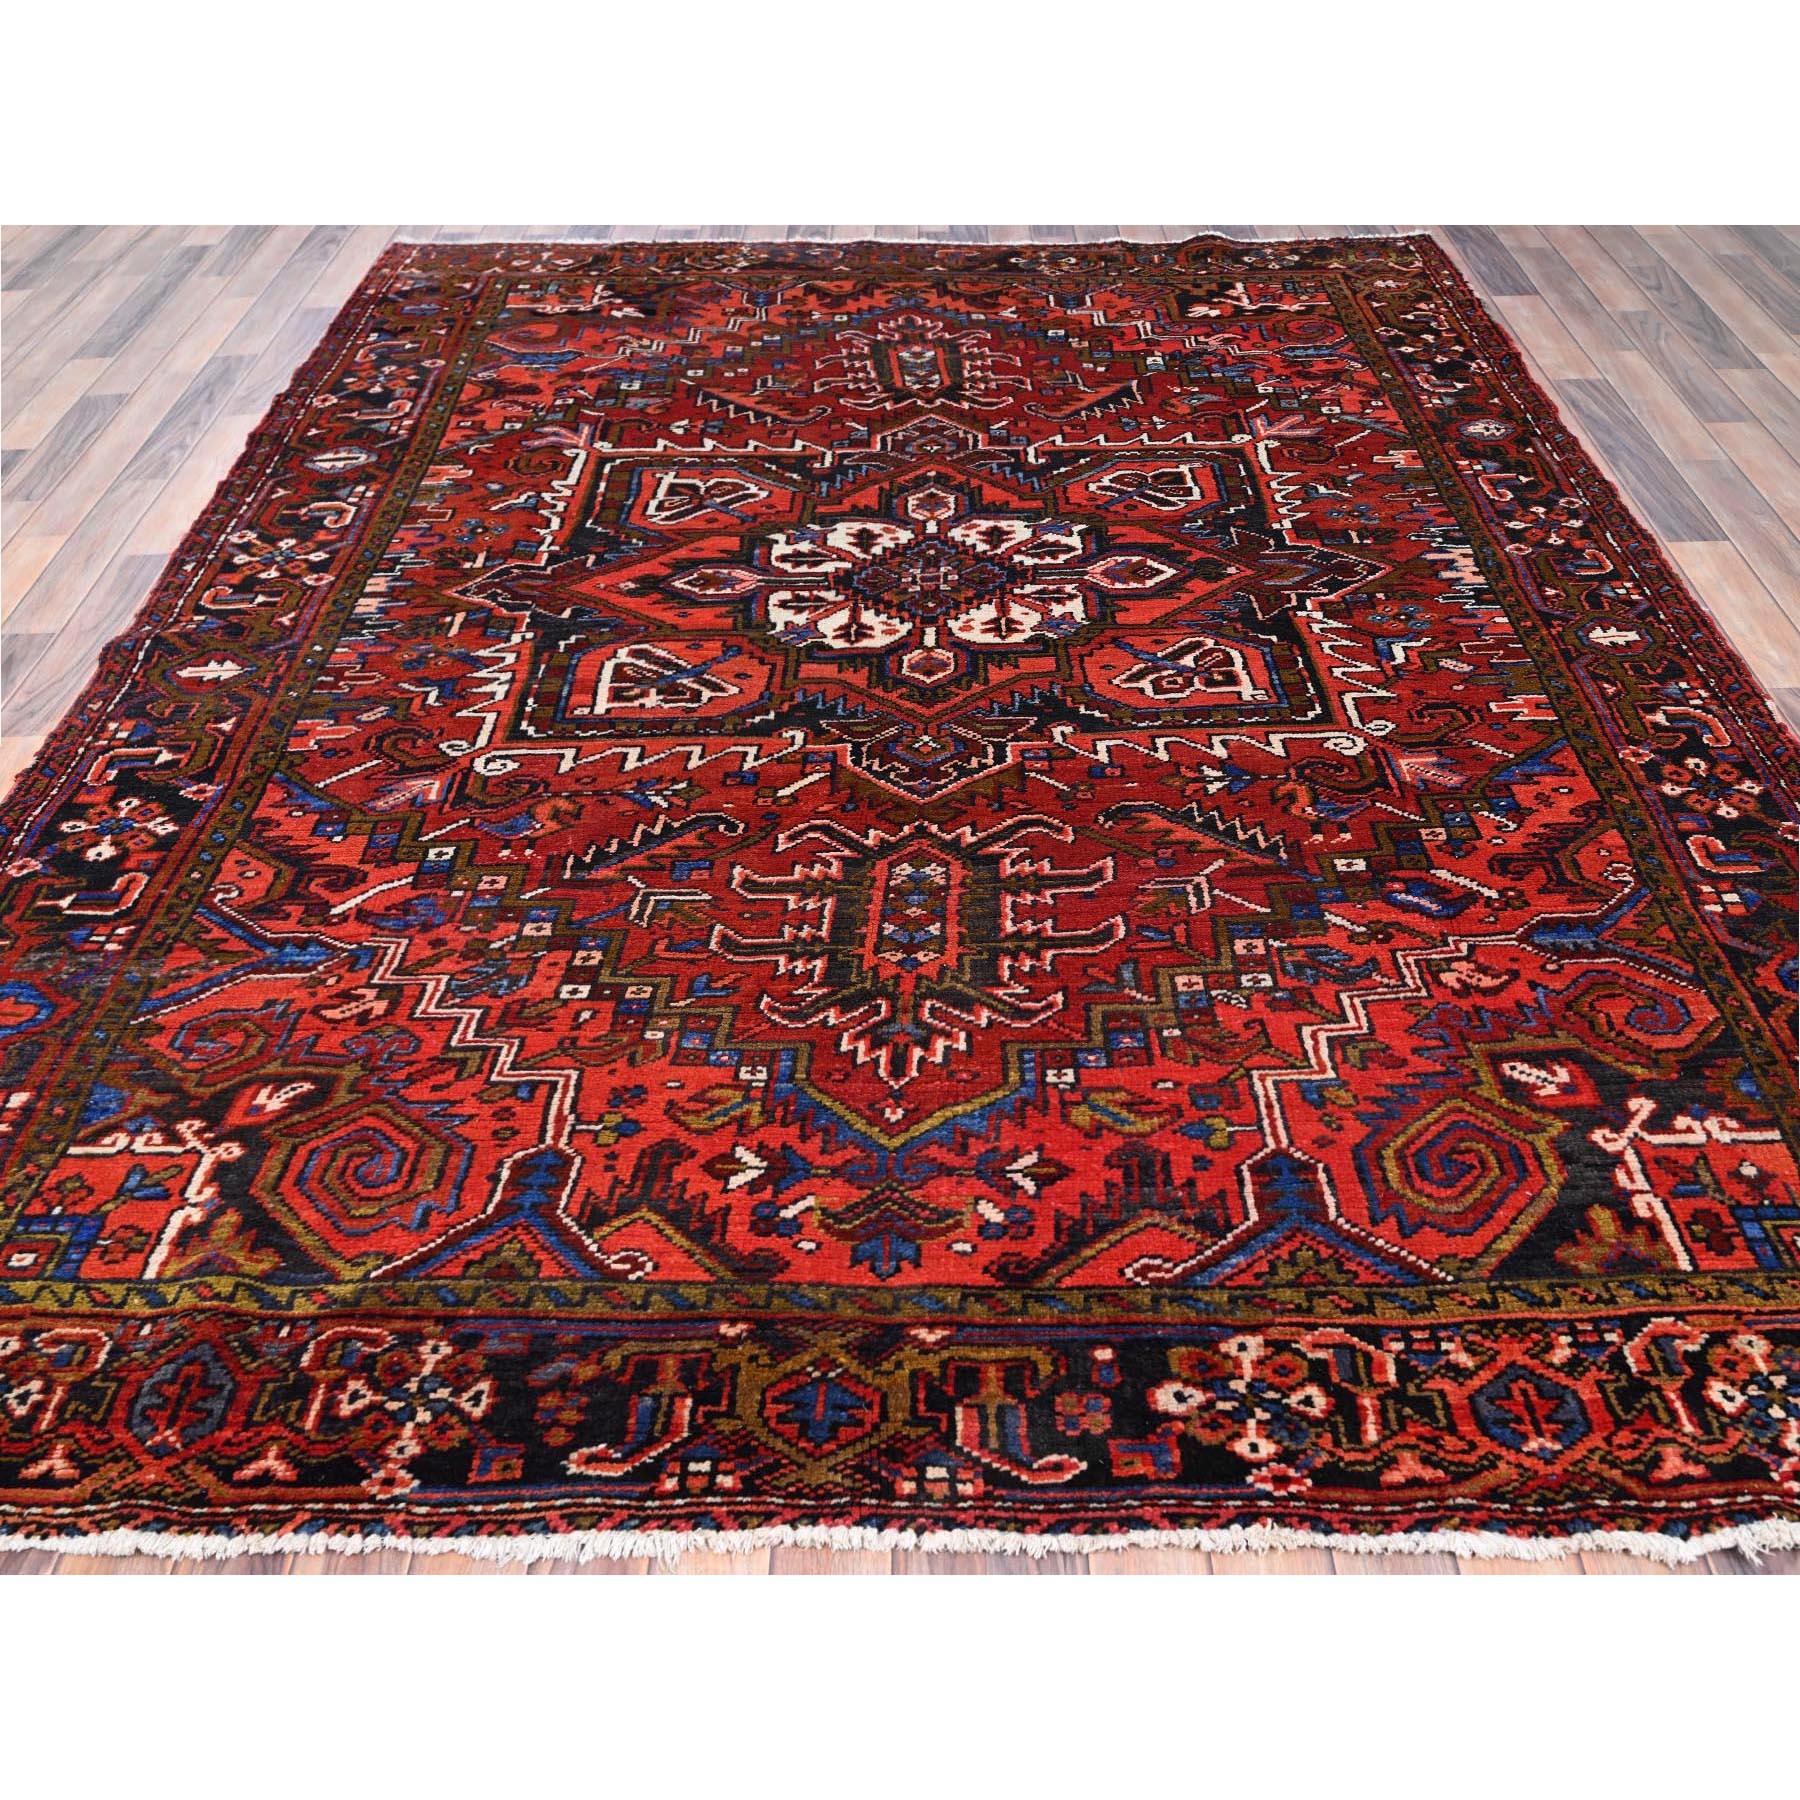 Persian Chili Red Vintage Good Condition Rustic Look Worn Wool Hand Knotted Oriental Rug For Sale